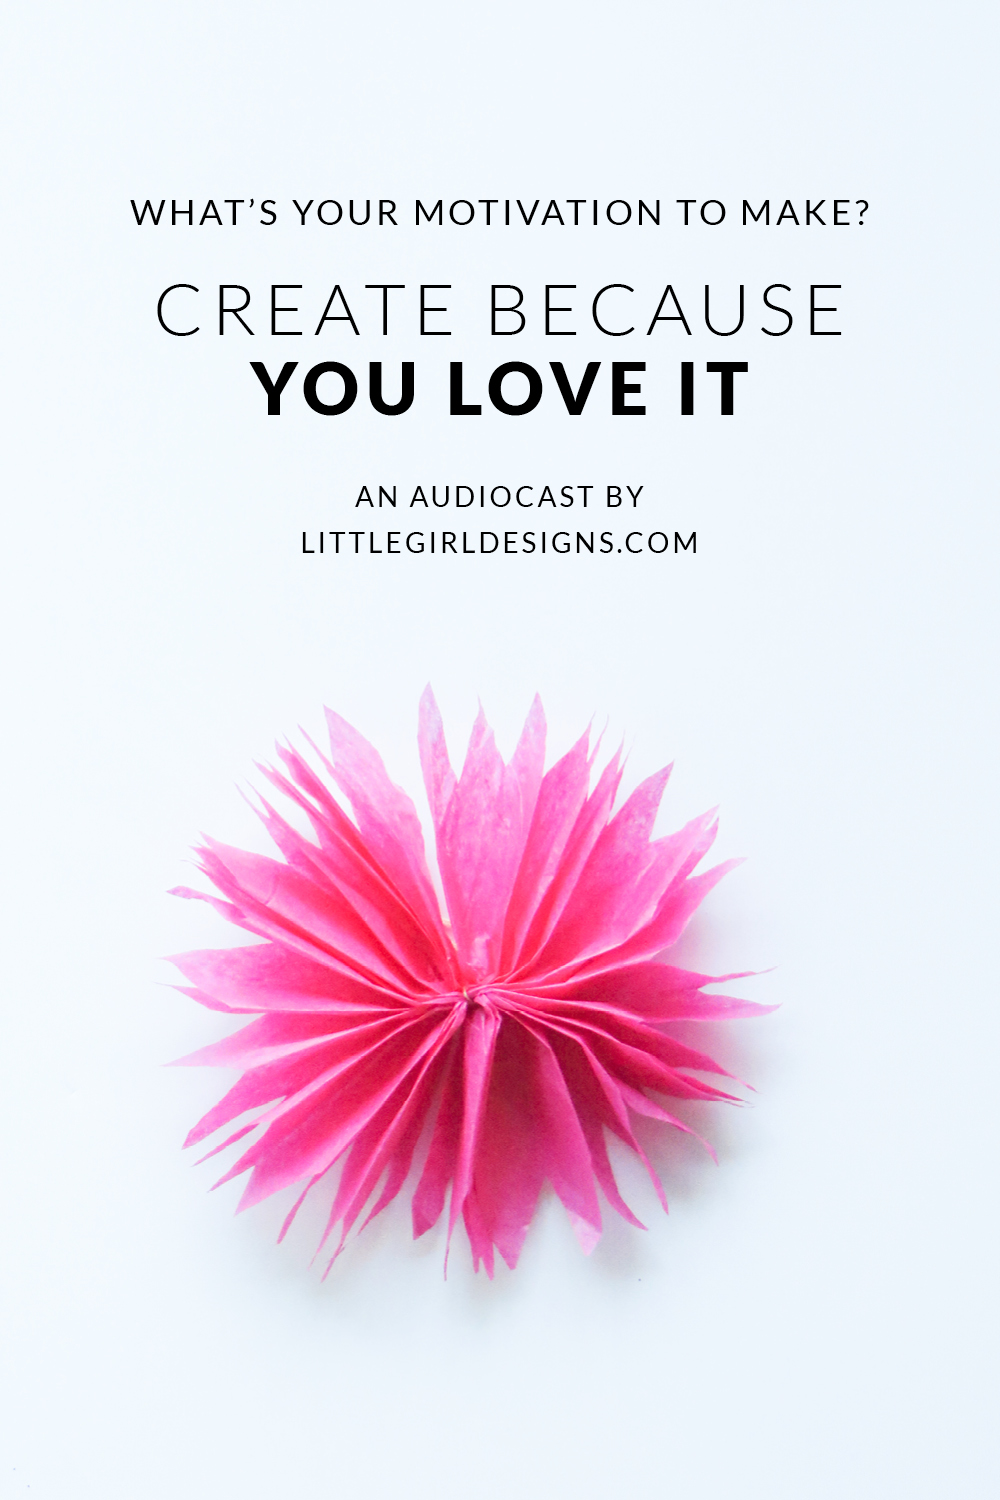 Create Because You LOVE It (audiocast)